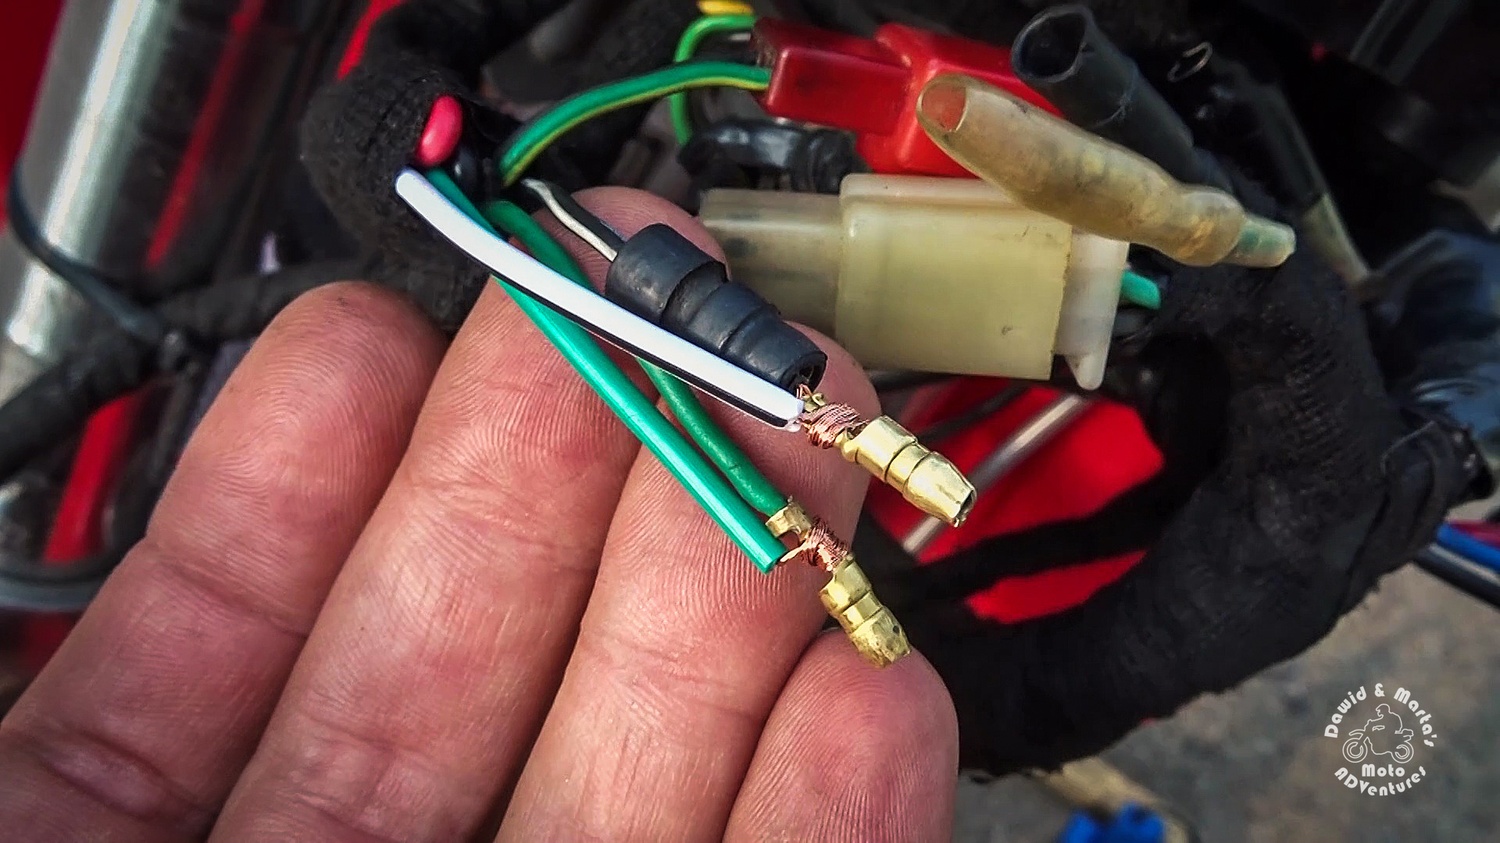 Soldering ignition switch in Honda XR400